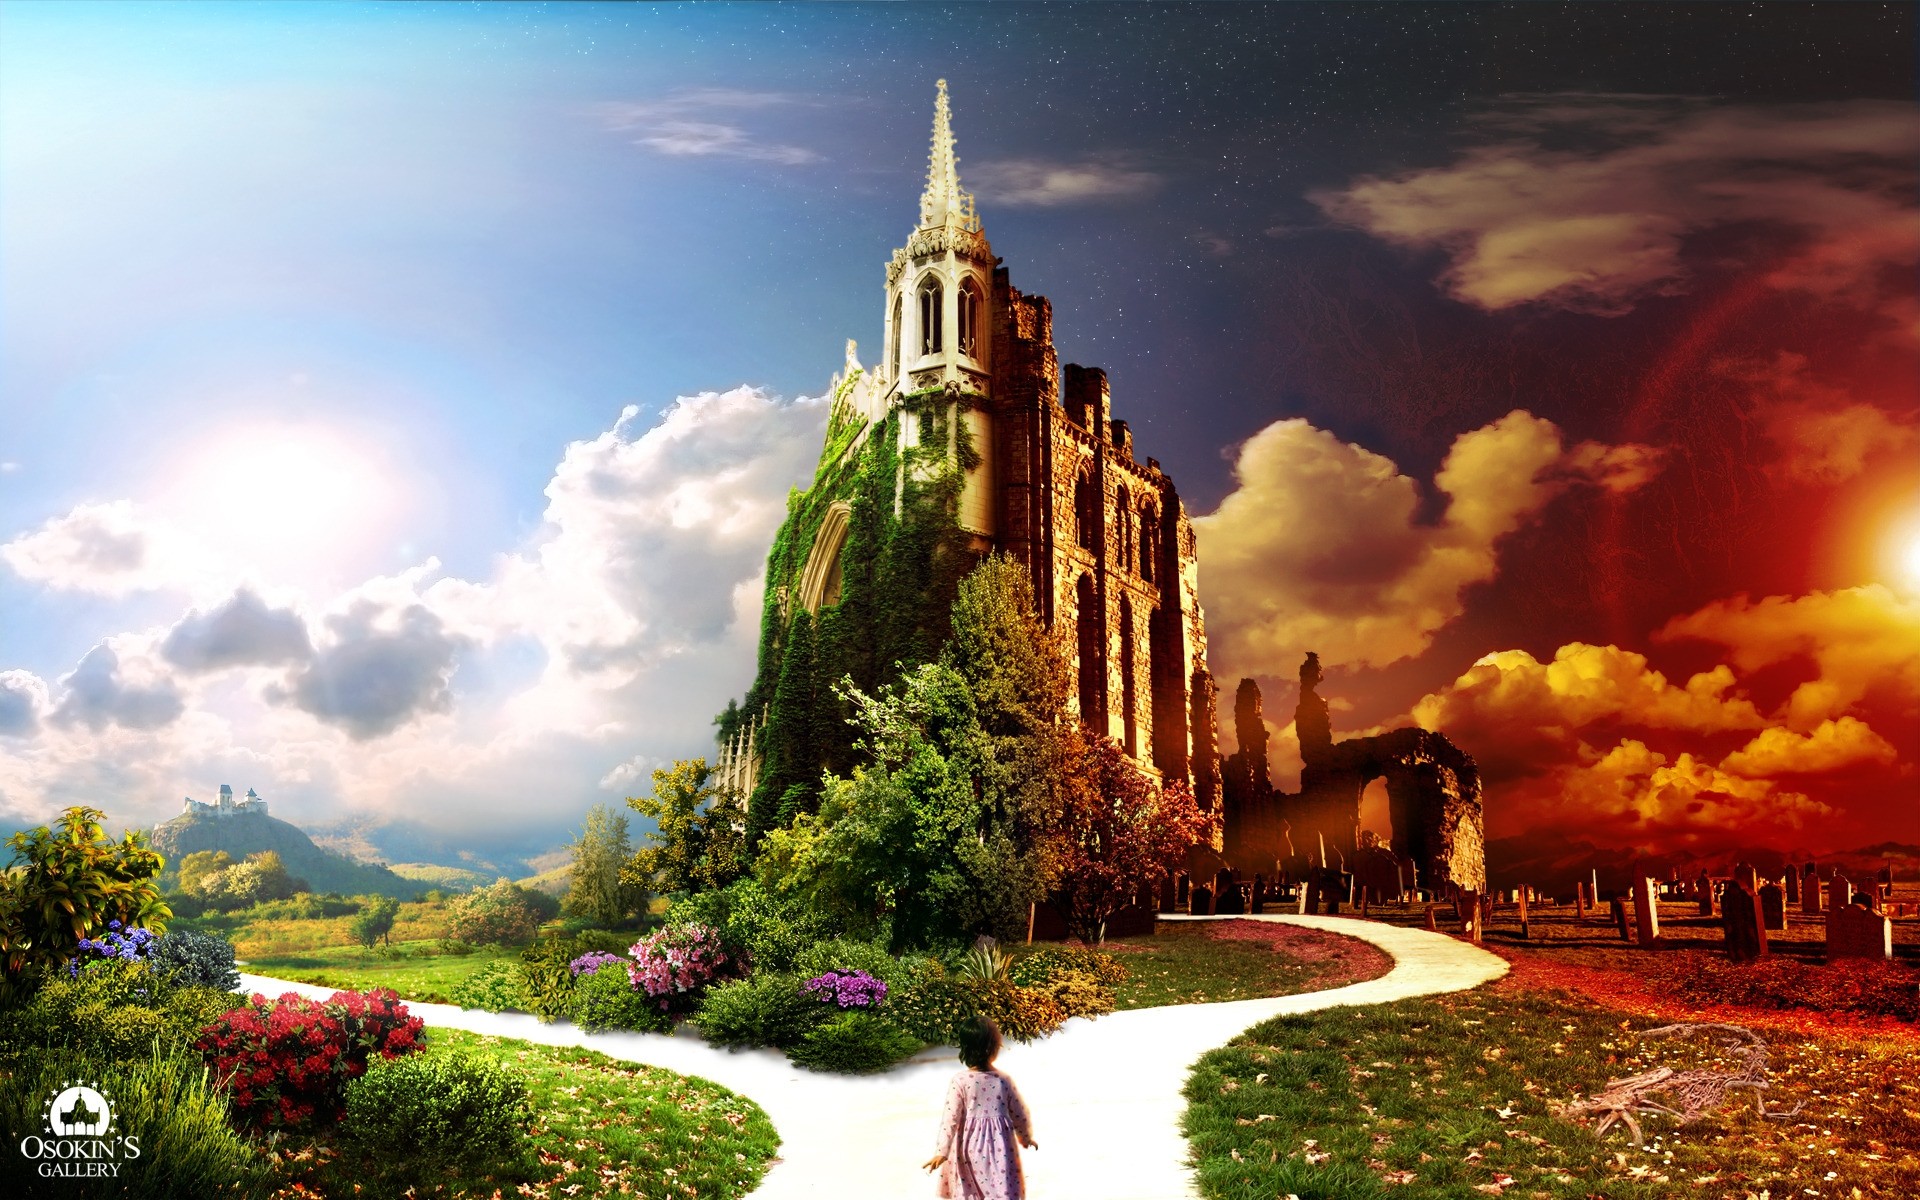 photo manipulation architecture travel outdoors sky religion building city tree nature scenery